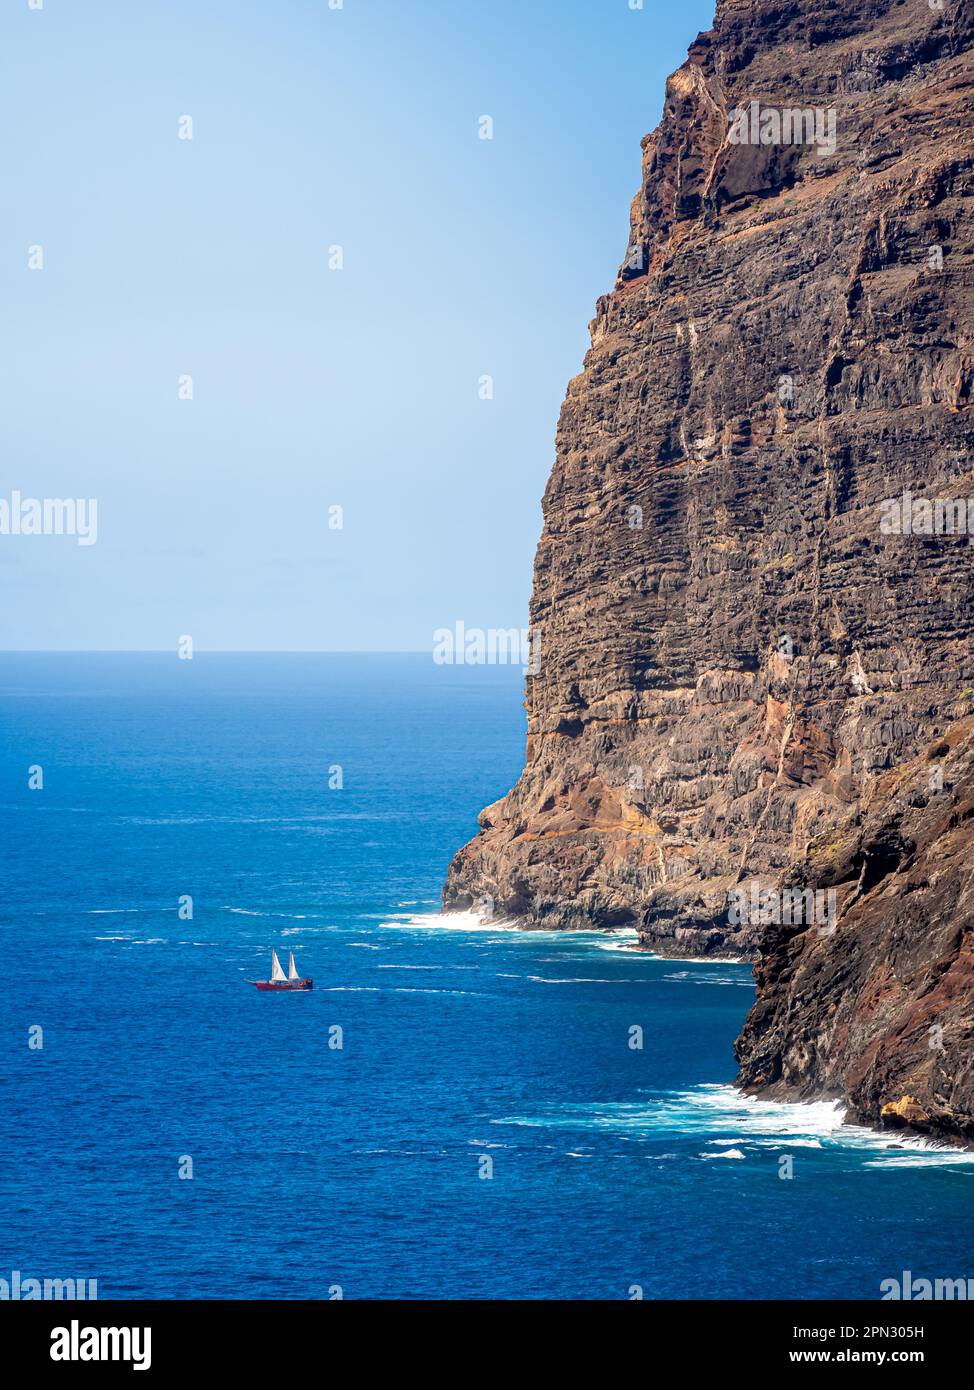 A pirate sailboat sets out on an adventure amidst the awe-inspiring cliffs of Los Gigantes, with the vast Atlantic Ocean stretching into the distance. Stock Photo